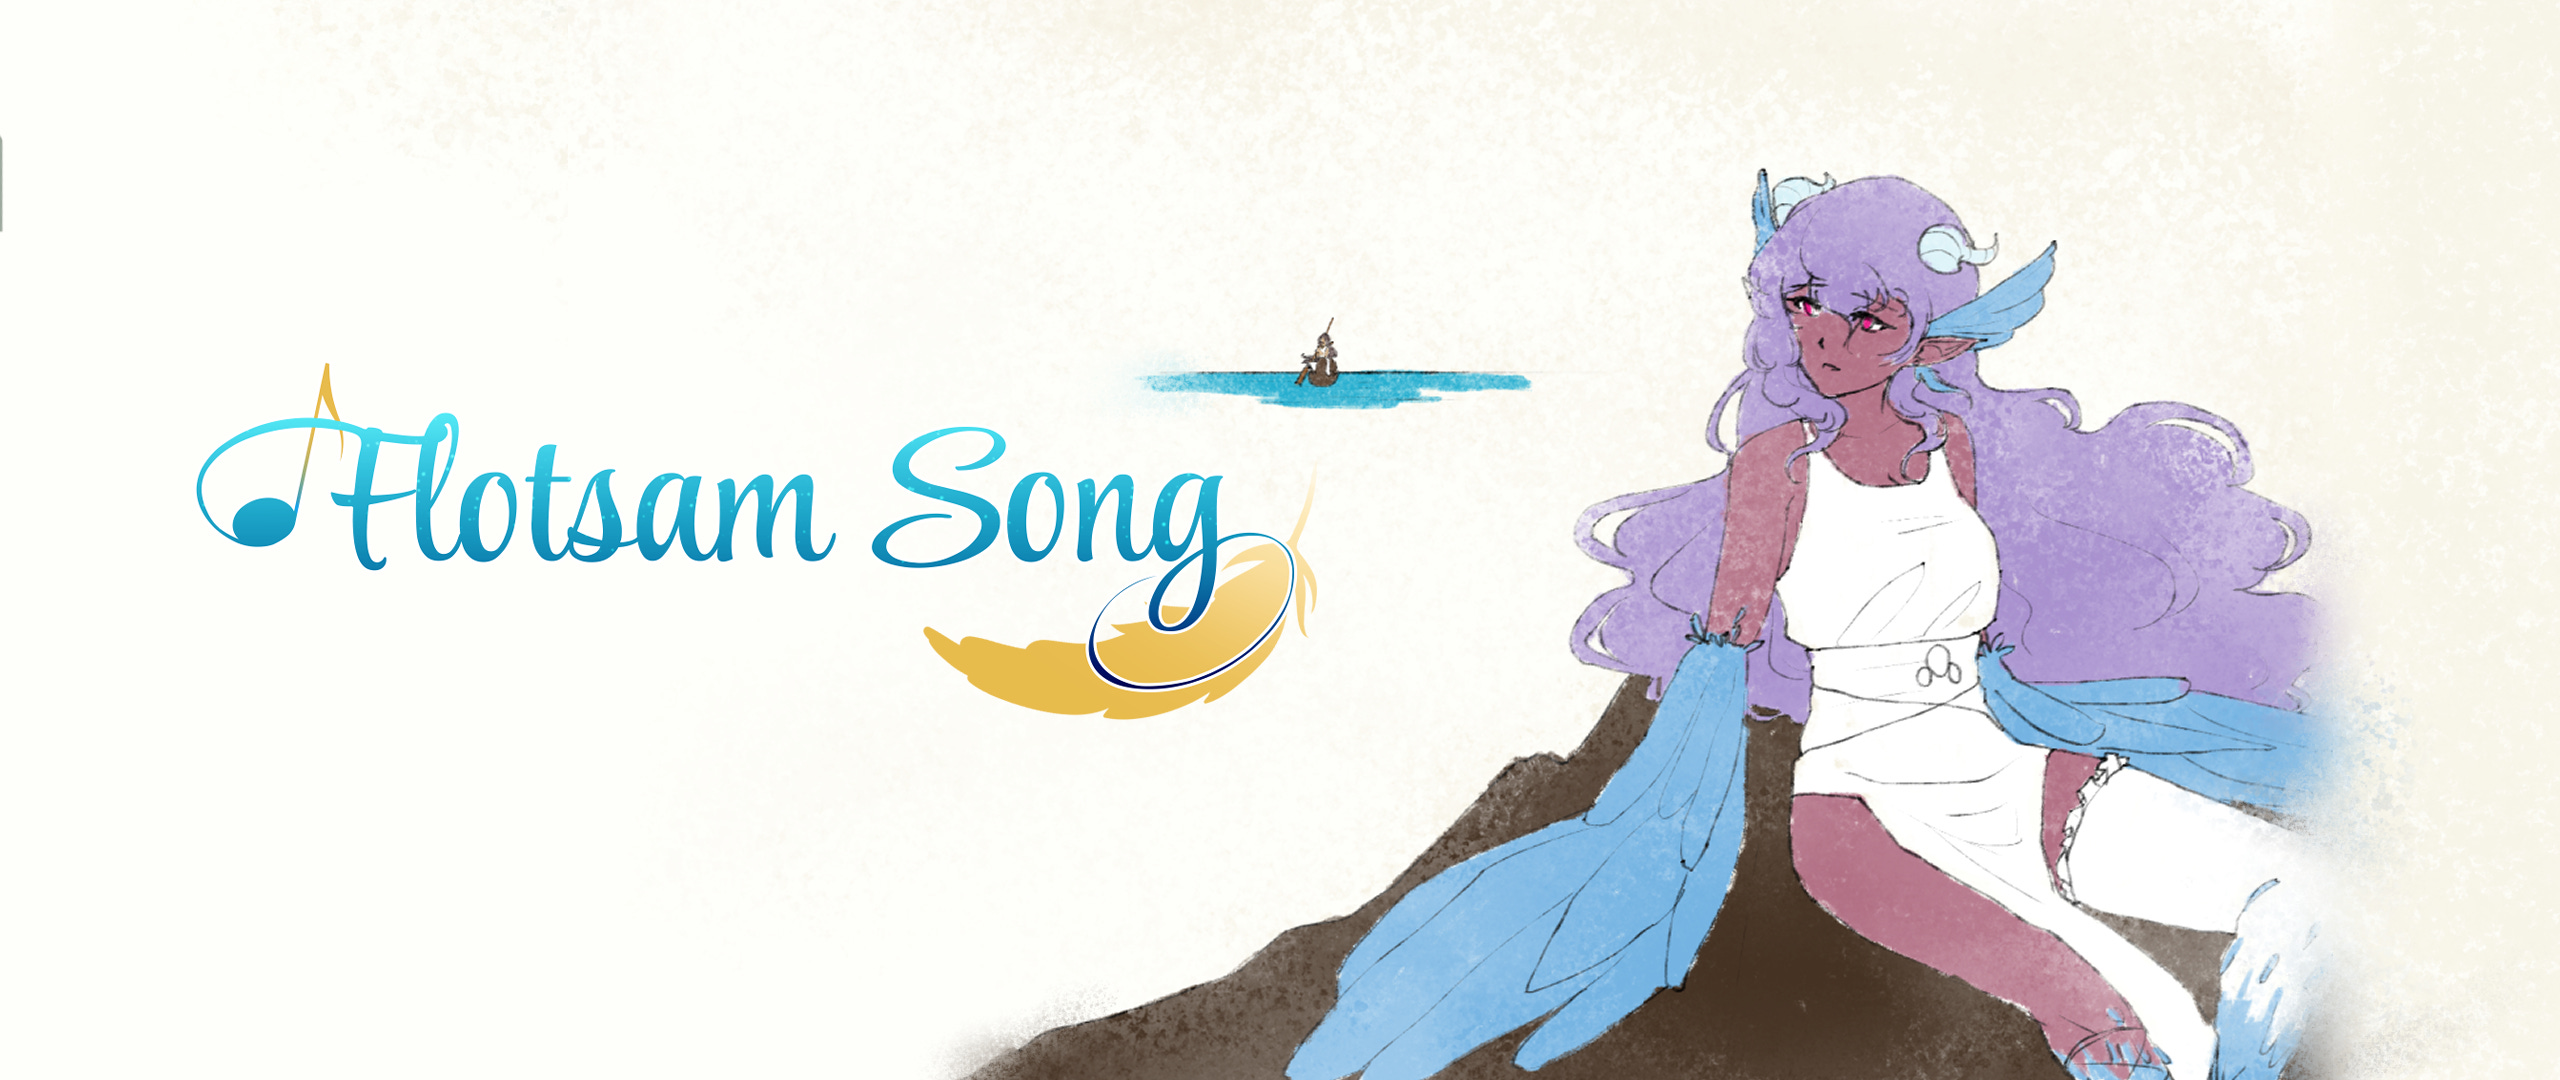 flotsam song banner featuring monster girl selinuntius looking at a girl (melos) rowing in from a distance